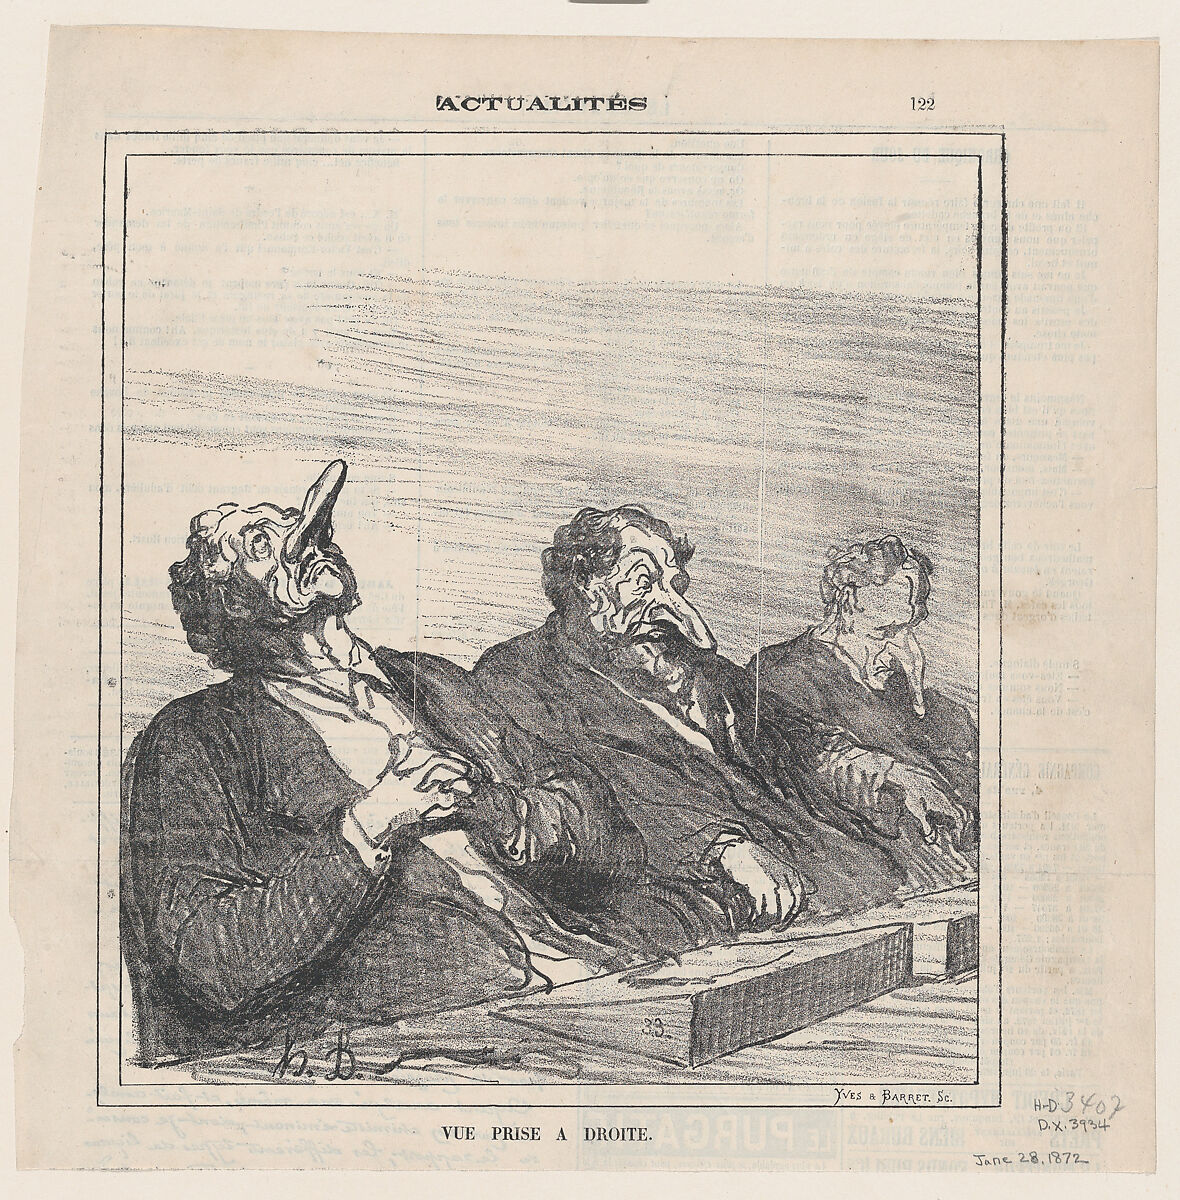 View of the right, from 'News of the day,' published in Le Charivari, June 28, 1872, Honoré Daumier (French, Marseilles 1808–1879 Valmondois), Lithograph on newsprint 